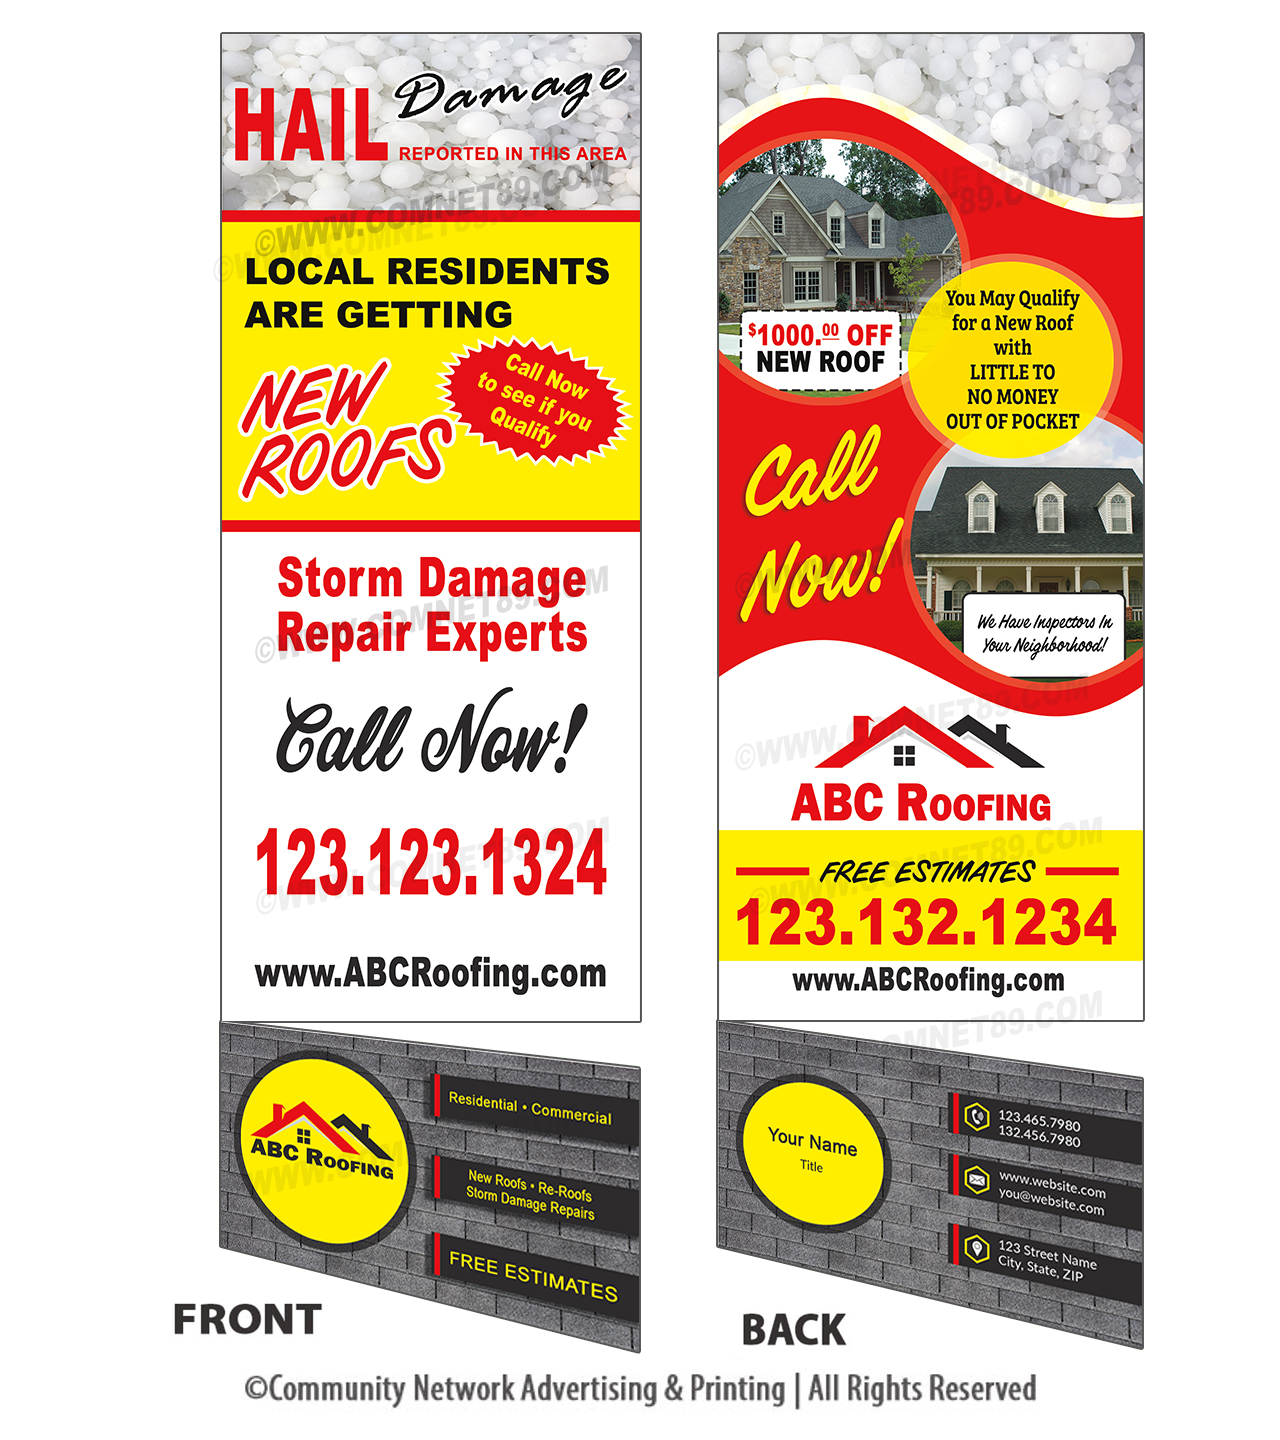 Roofing Rack cards are an easy way to connect with property owners after a storm.